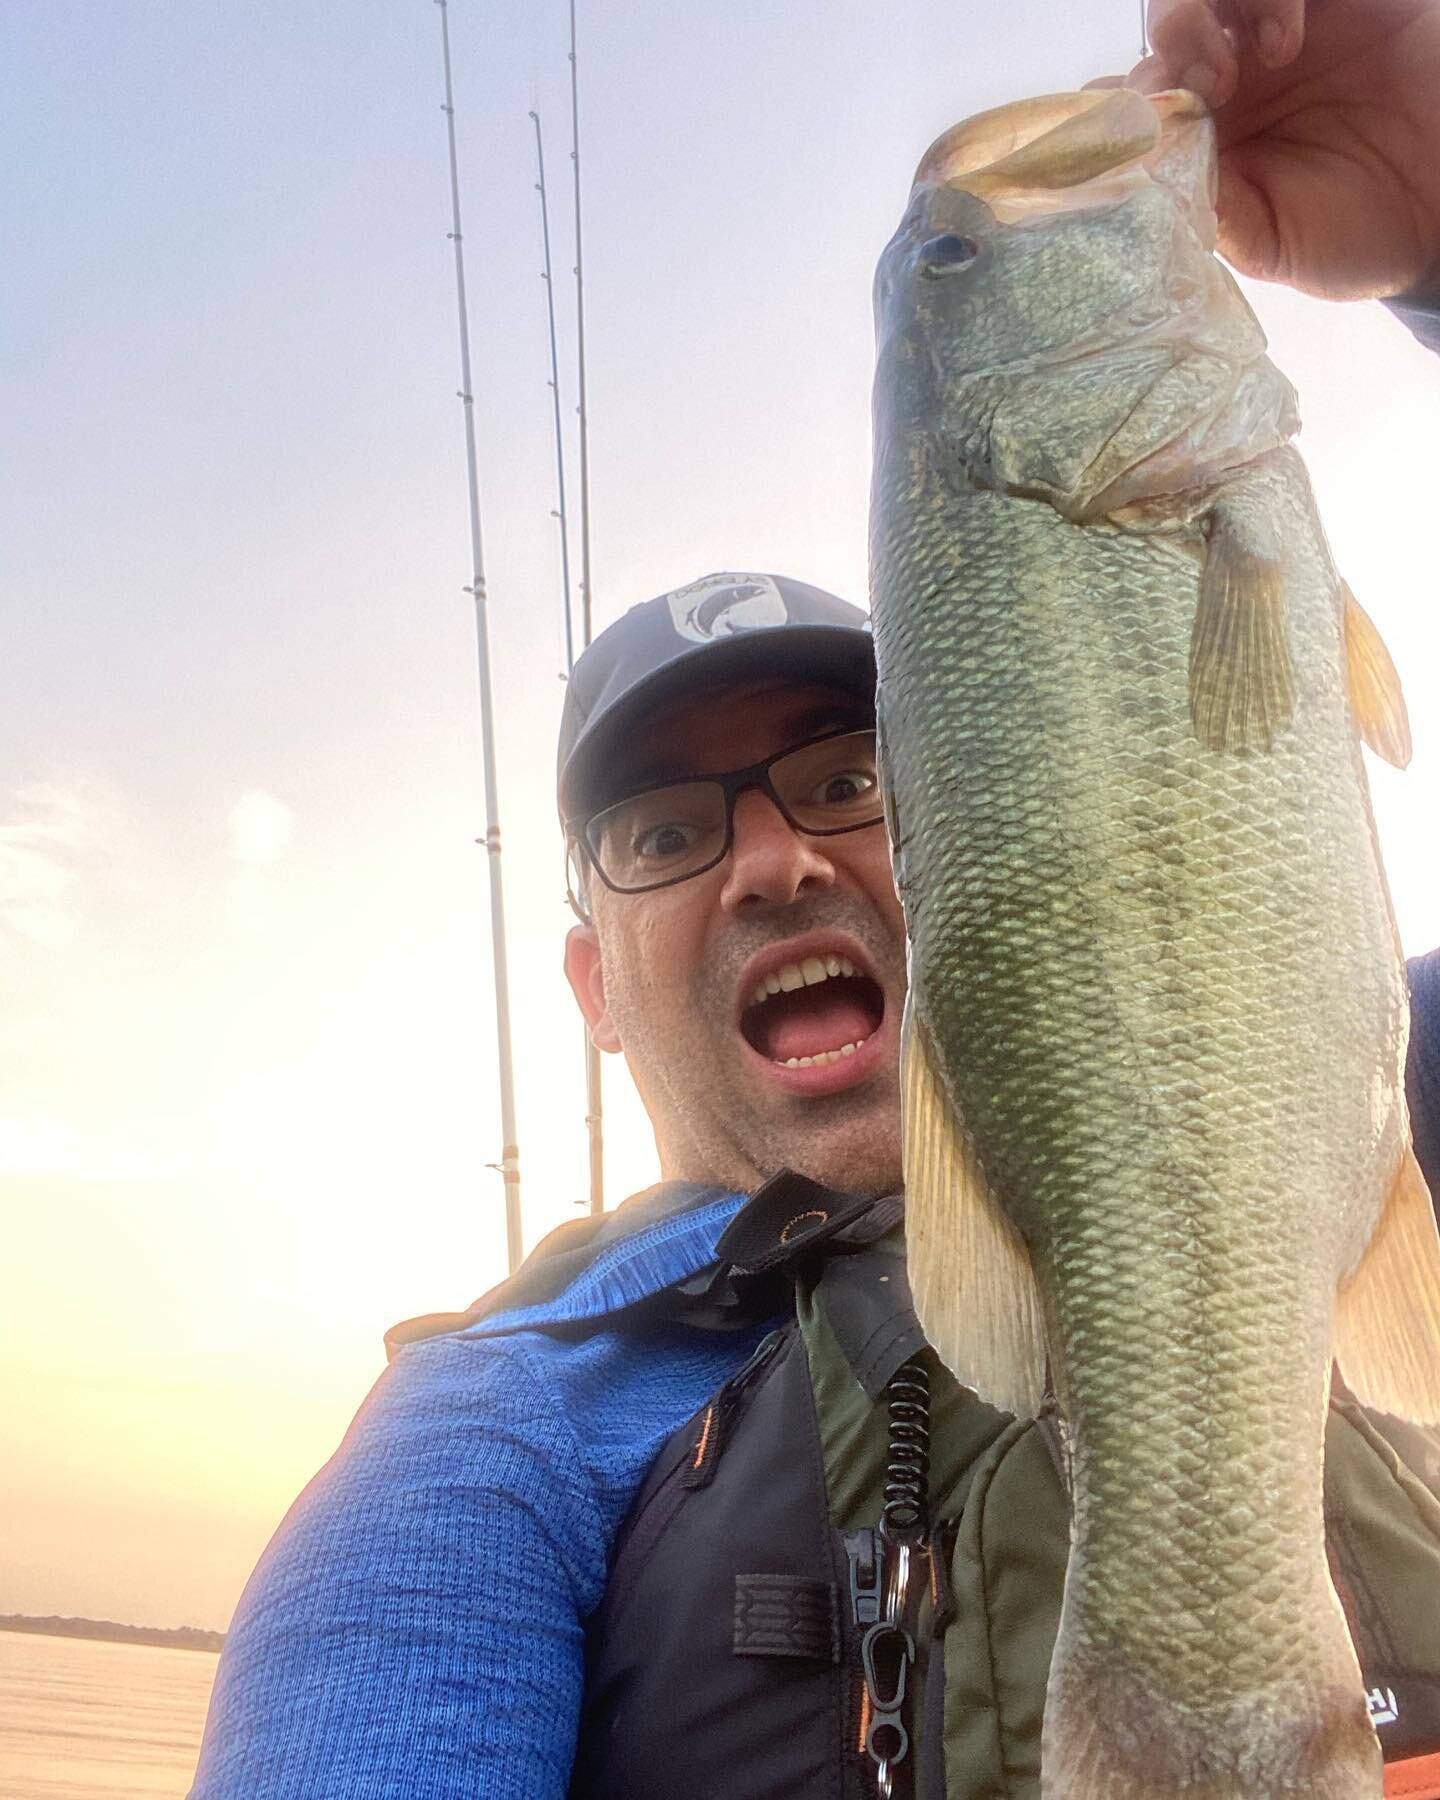 Who else is exited to go fishing this weekend??
.
#basskayakandbeers #paddlenfin #largemouthbass #largemouthbassfishing #kayaking #kayak #kayakingadventures #kayakfishing #kayakbassfishing #kbf #texas #texas #douglasrods